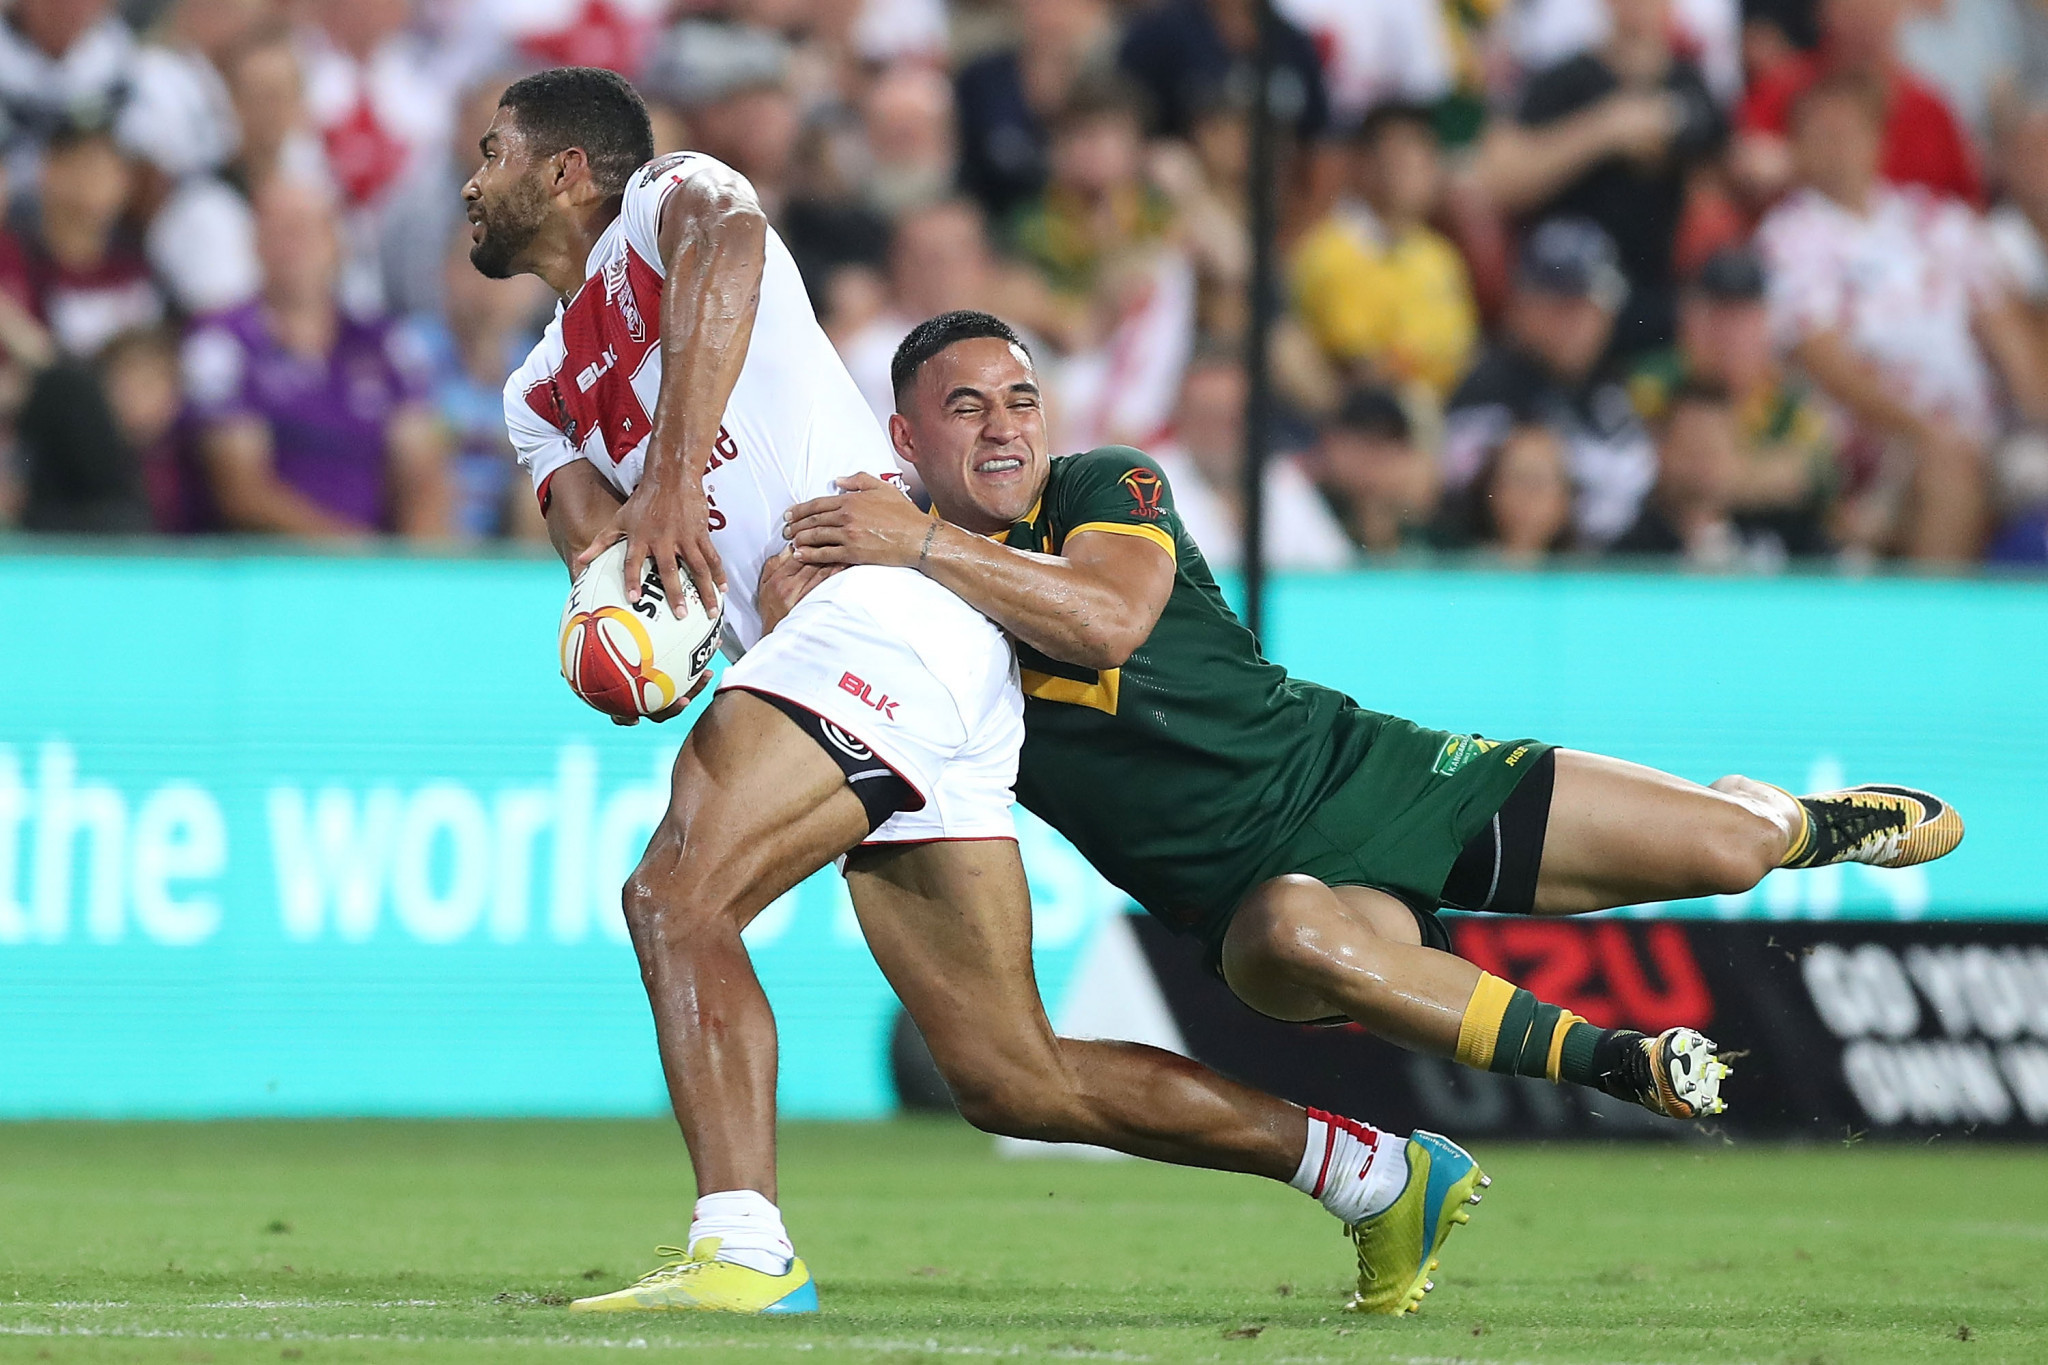 Differing COVID-19 lockdown policies in the northern and southern hemispheres made it impossible to stage RLWC2021 last year ©Getty Images